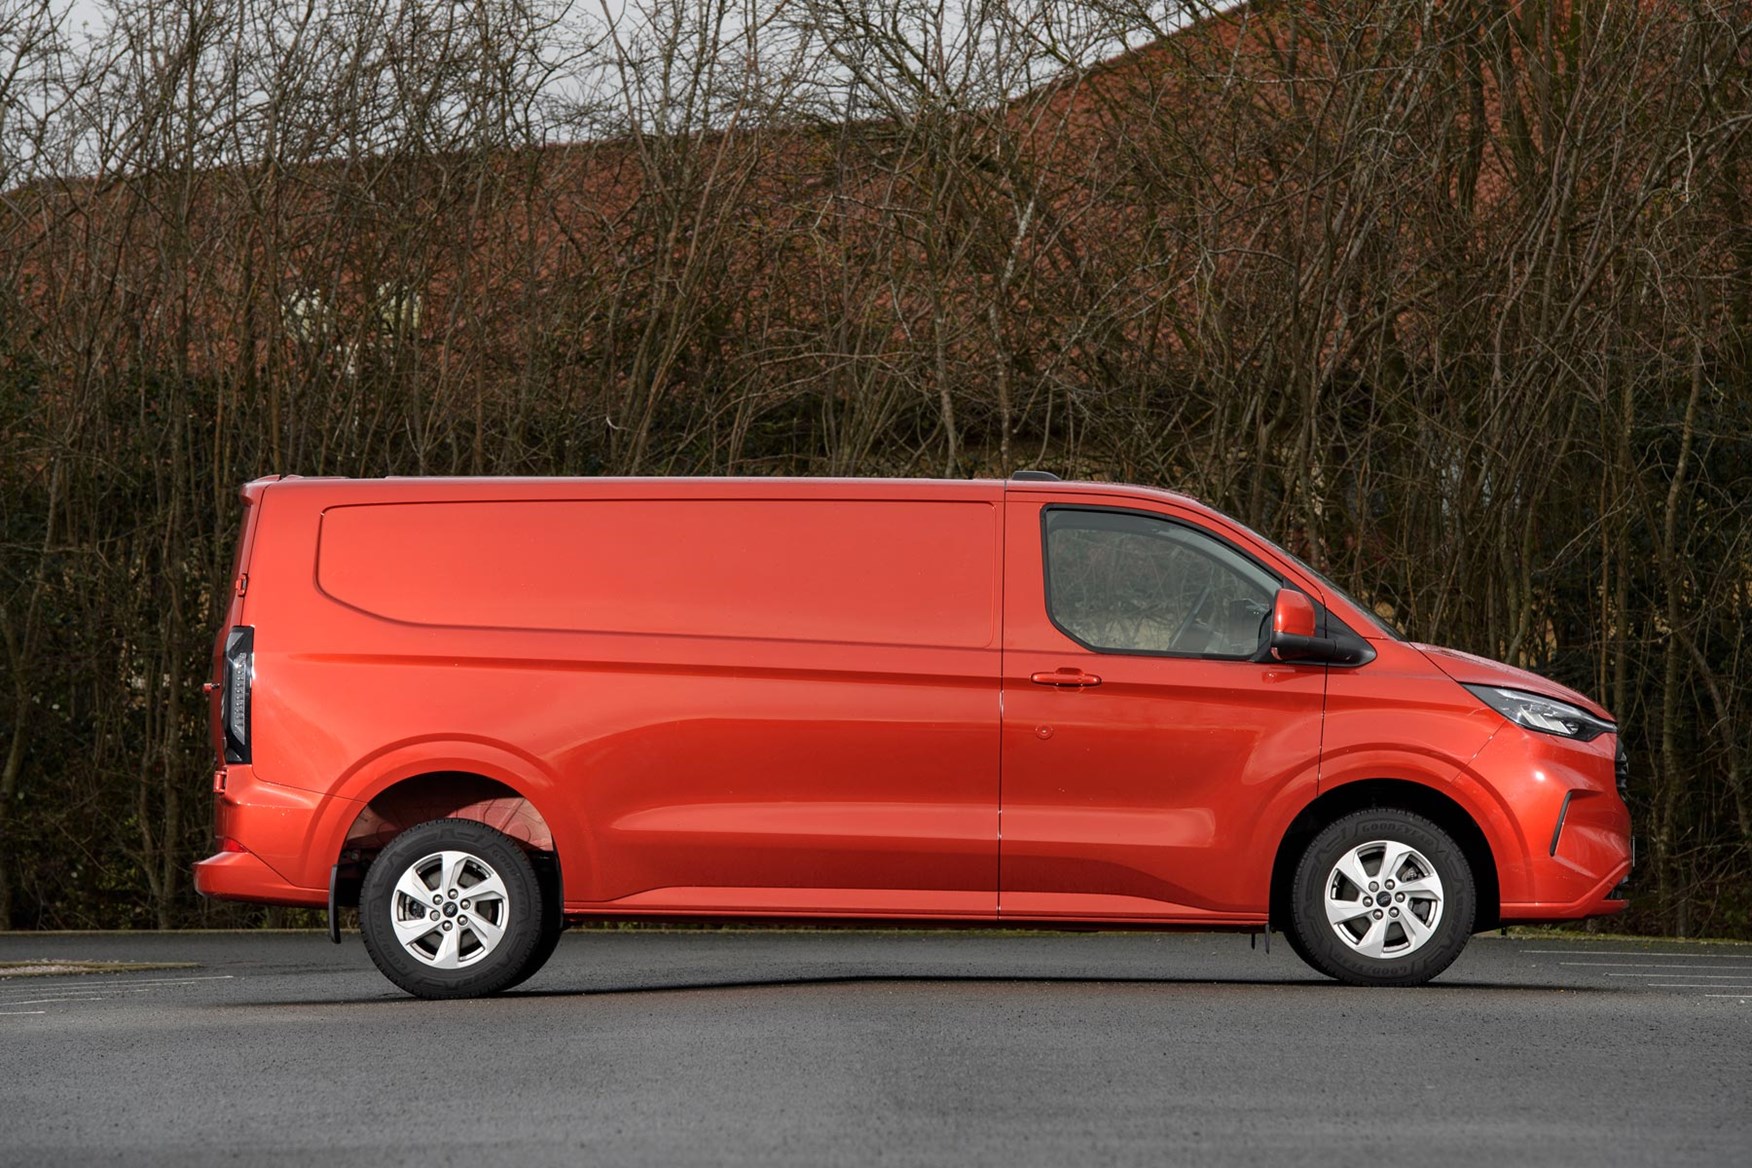 There will be a wide range of Ford Transit Customs to choose from.